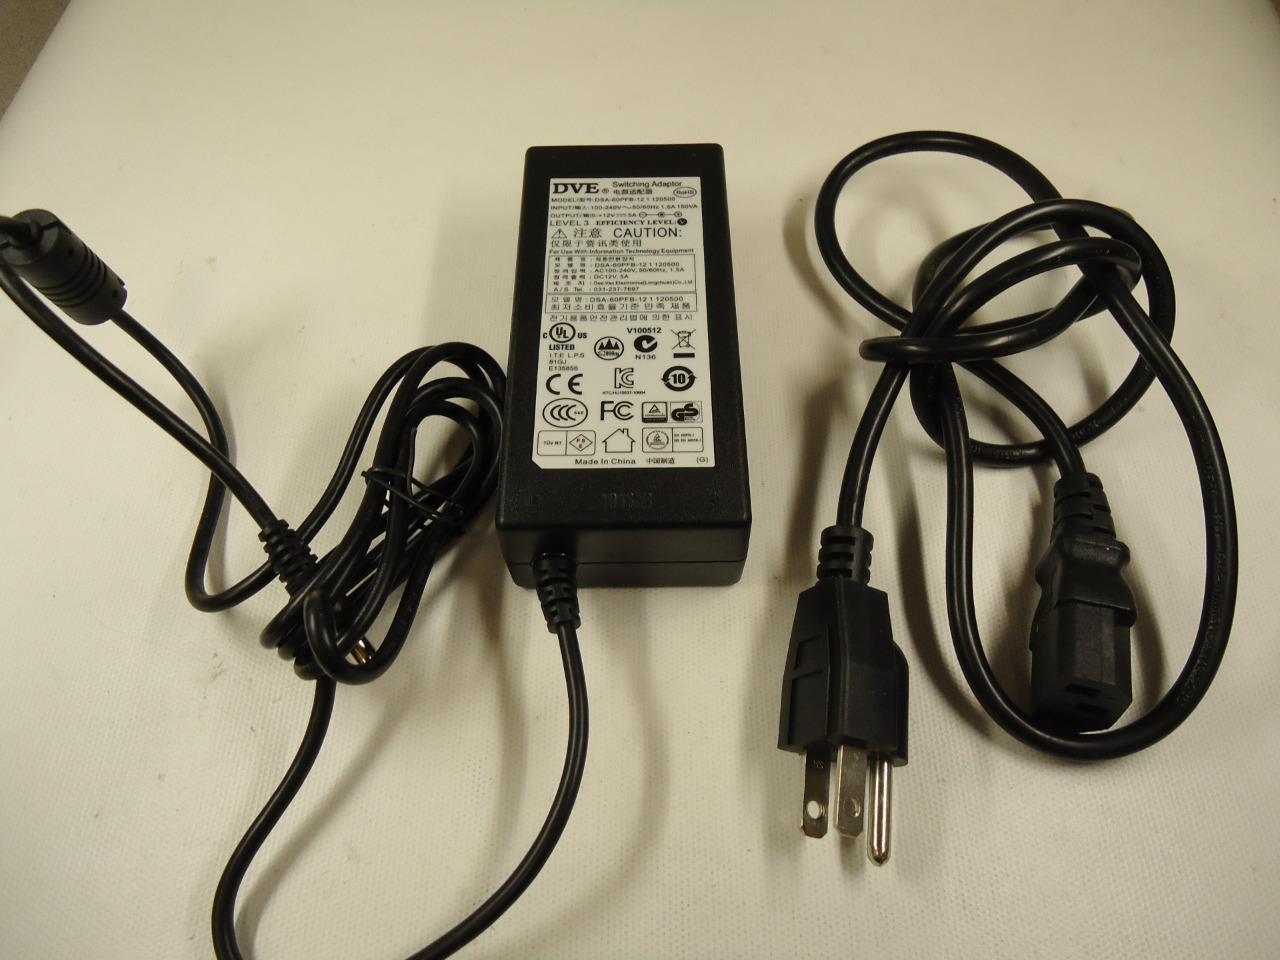 DVE DSA-60PFB-12 120500 Switching Monitor Power Supply with Power Cord New